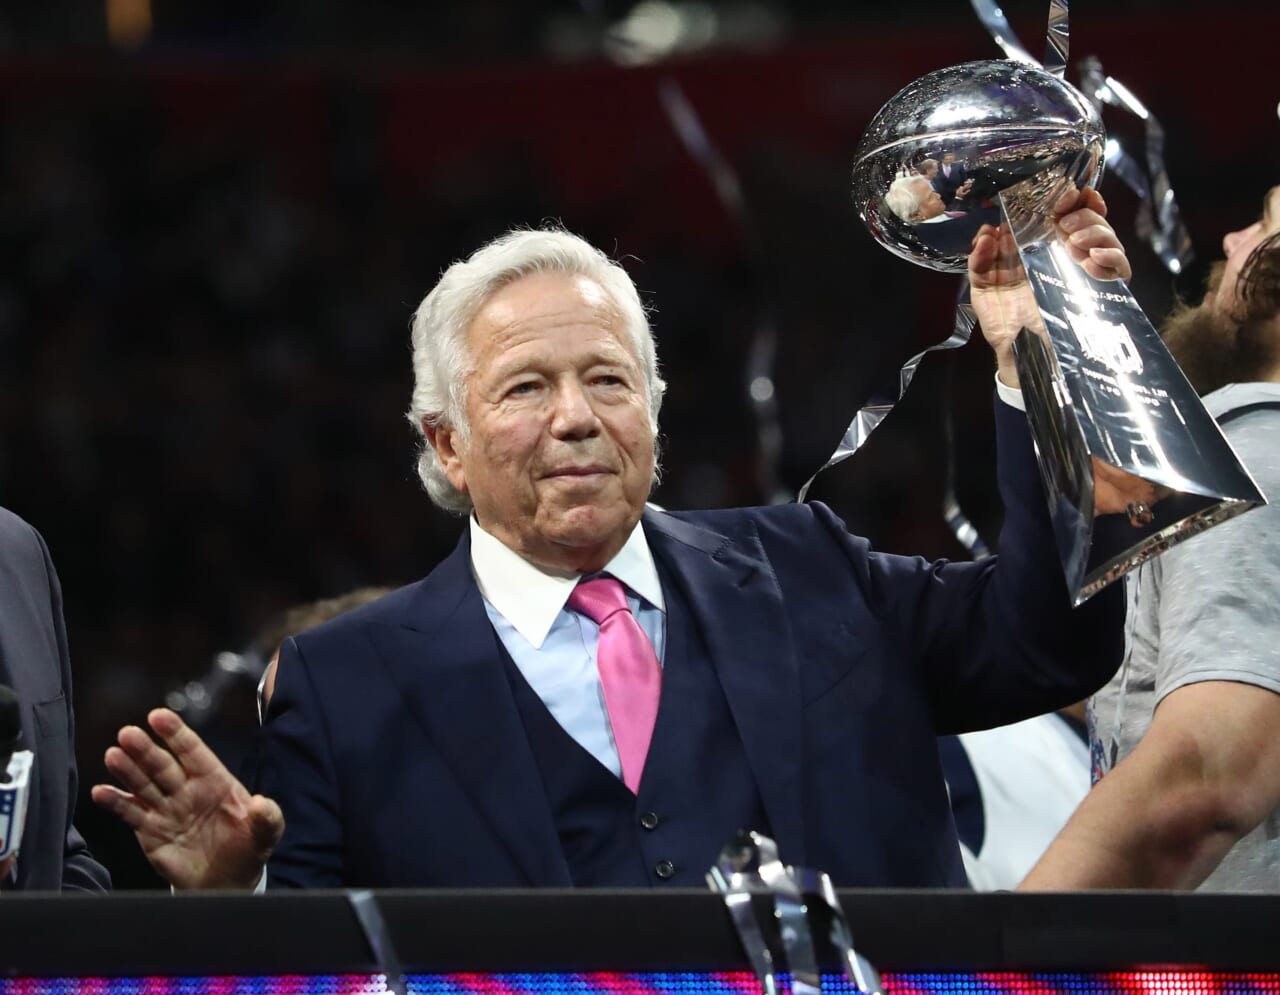 NFL has a Robert Kraft Problem, and They Helped To Create It